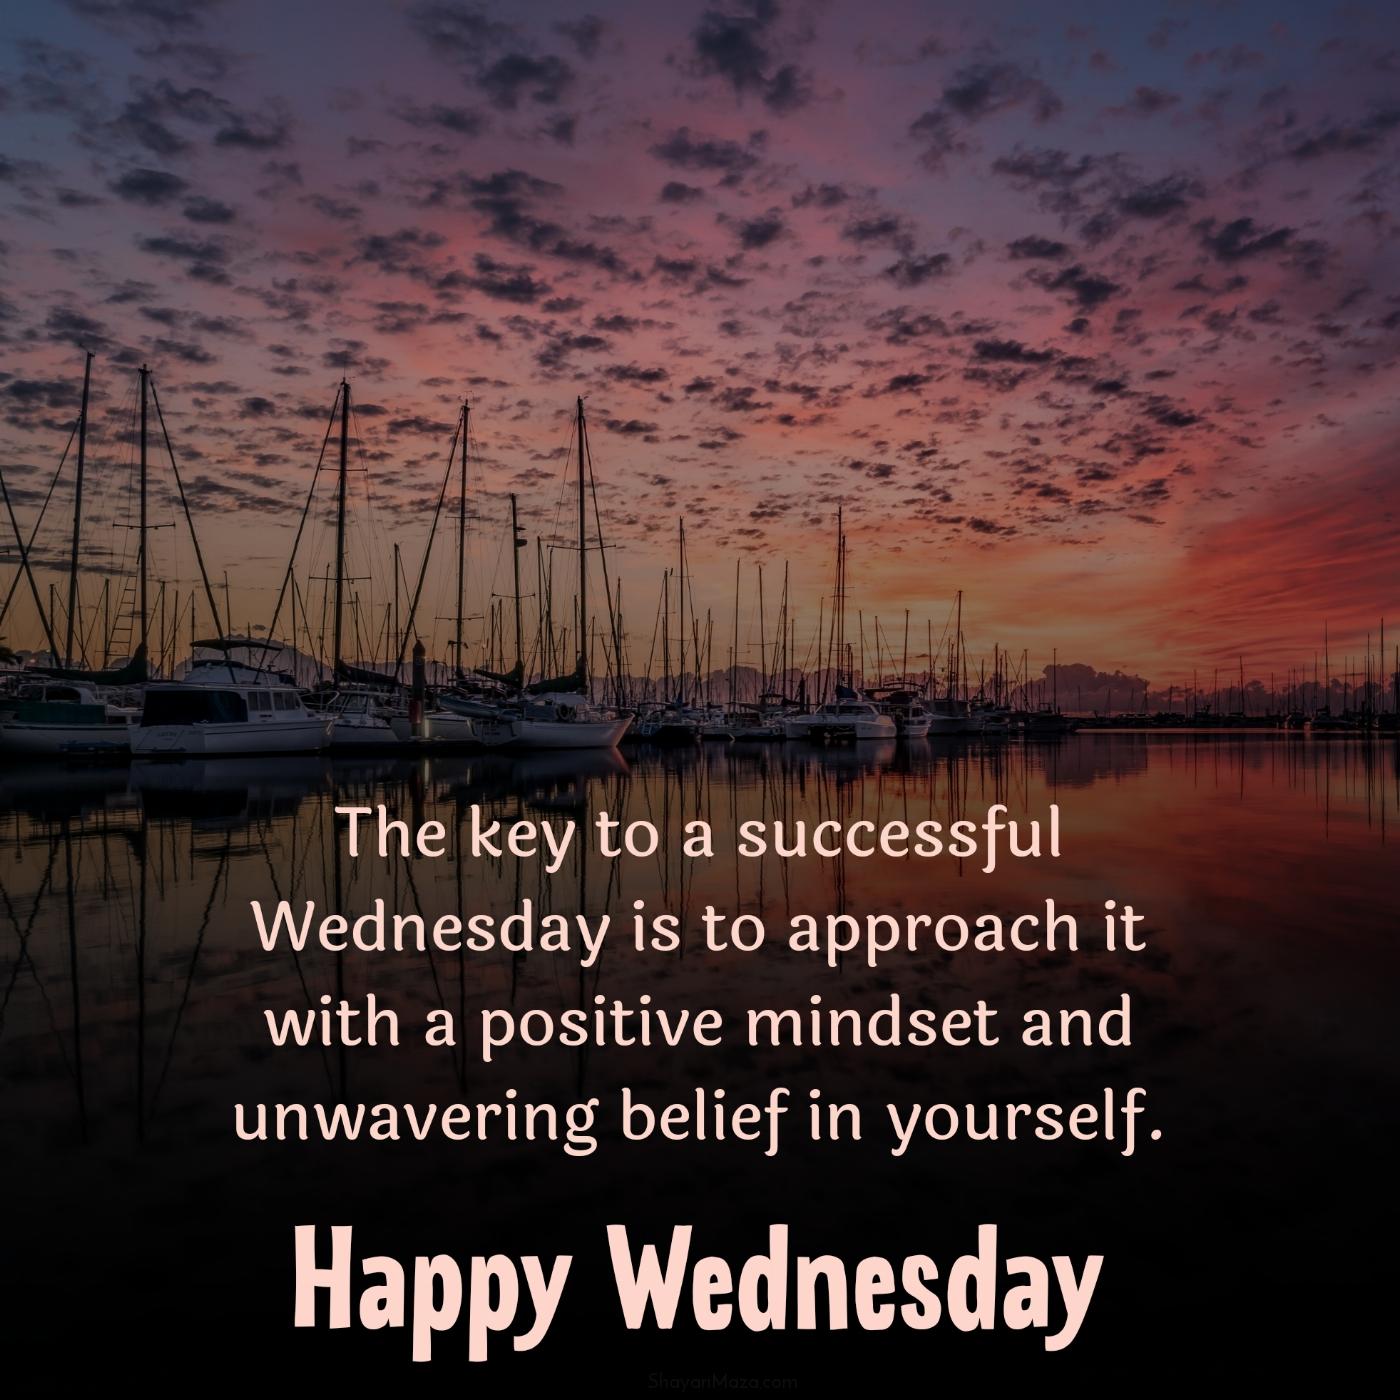 The key to a successful Wednesday is to approach it with a positive mindset